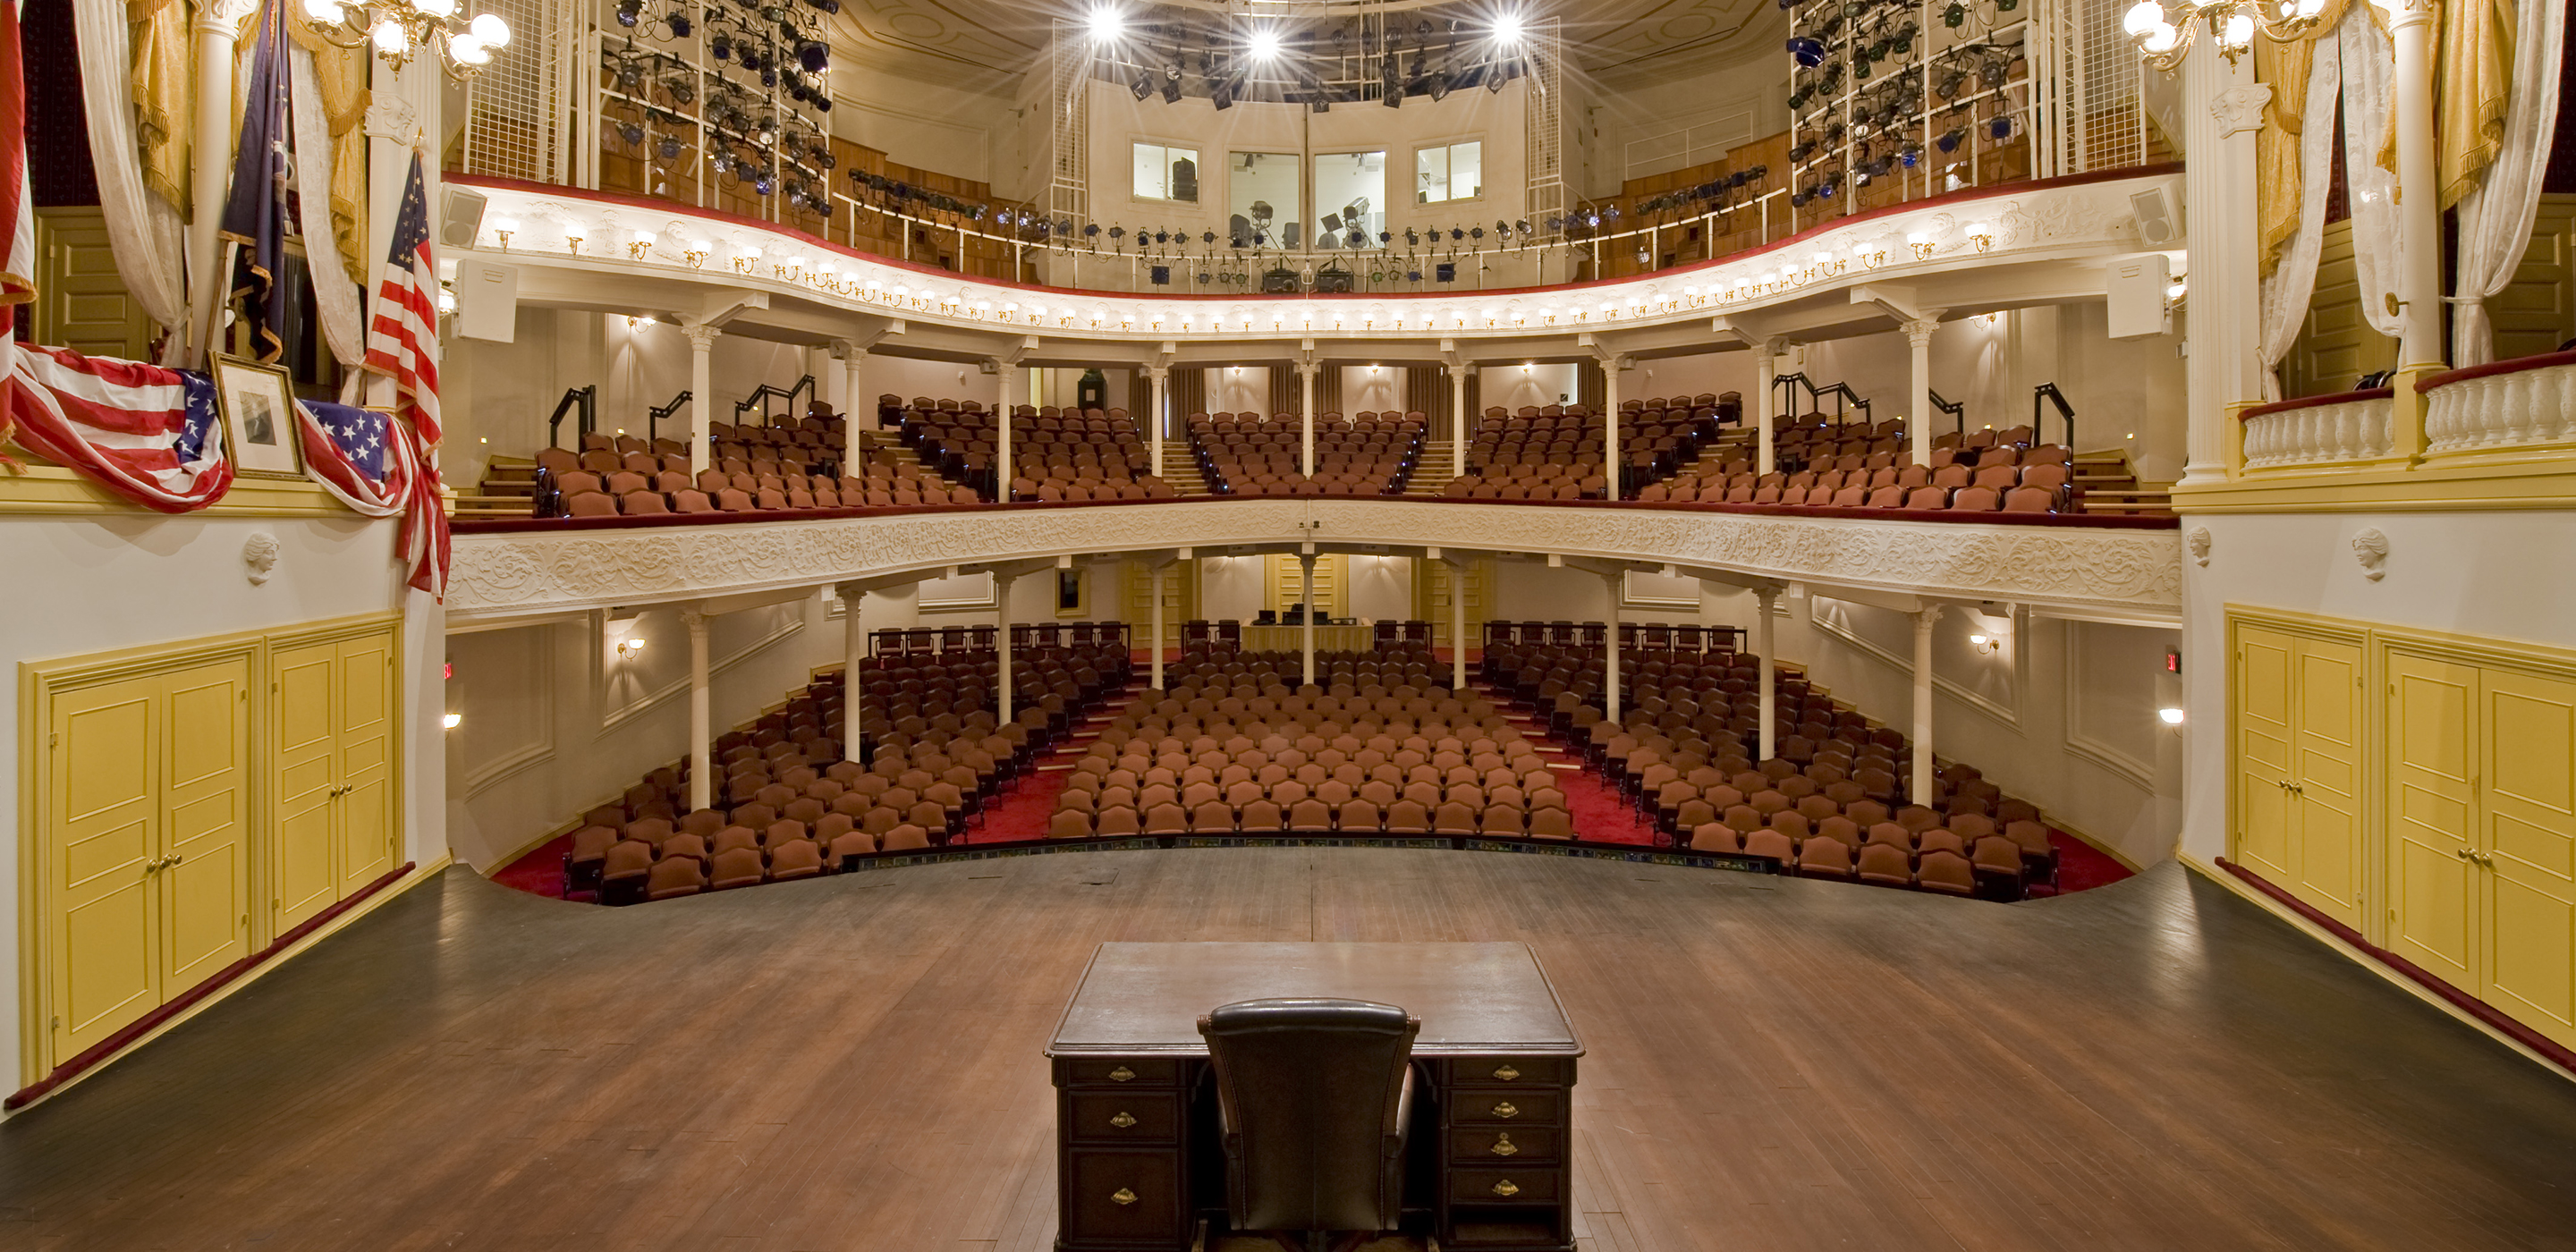 The view from the Ford’s Theatre stage looking out to the audience. To the left of the stage is the President Box with an American flag, a framed picture of George Washington and American flag bunting draped over the box. To the right is another box with yellow and white curtains. In the center of the stage is a wooden desk. The view includes two levels of seating and rows of lighting equipment on the third level.